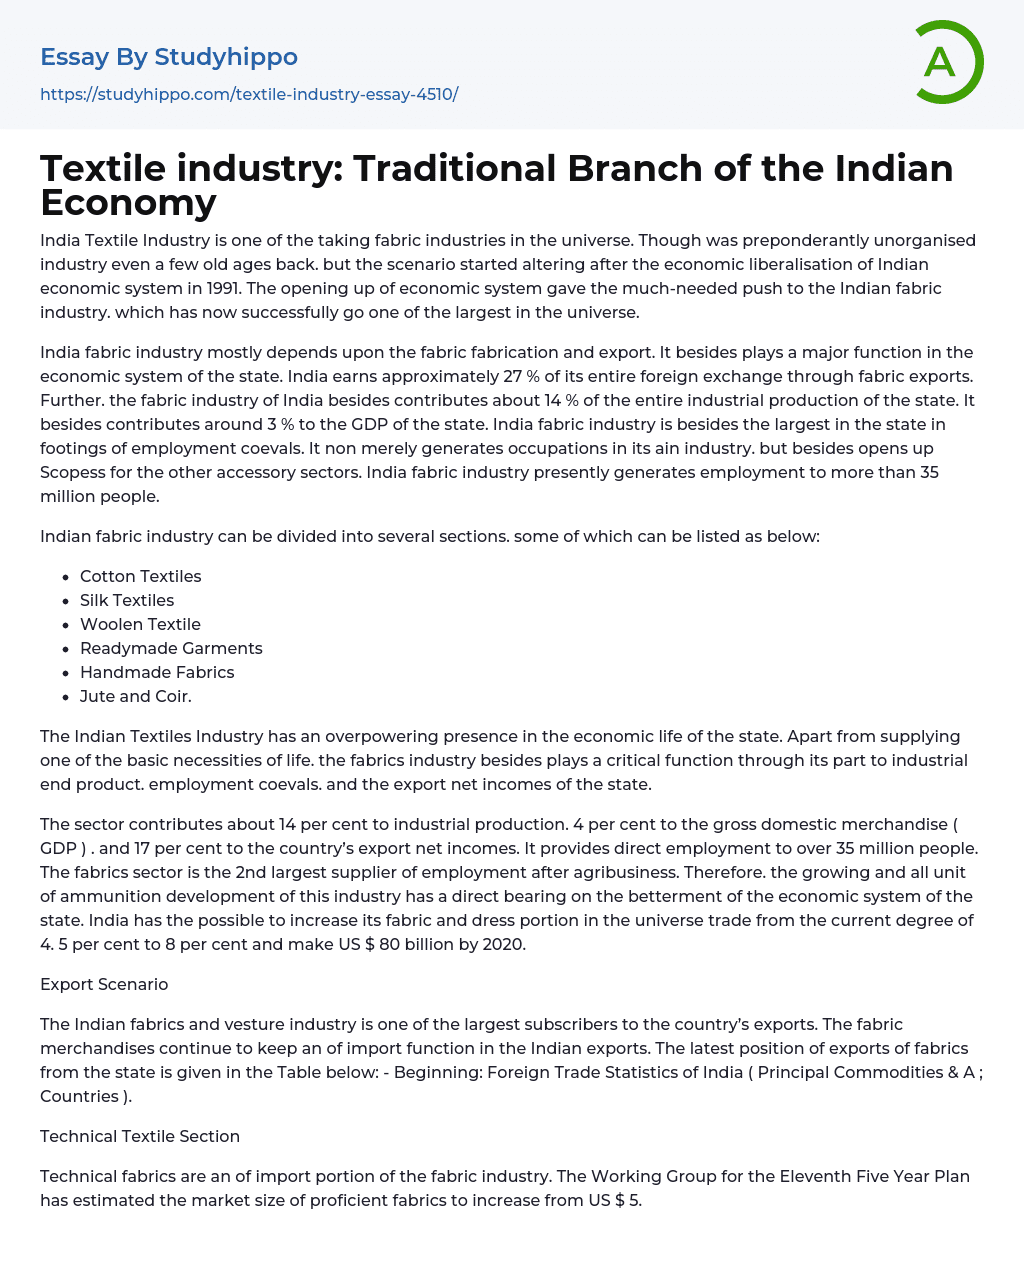 Textile industry: Traditional Branch of the Indian Economy Essay Example